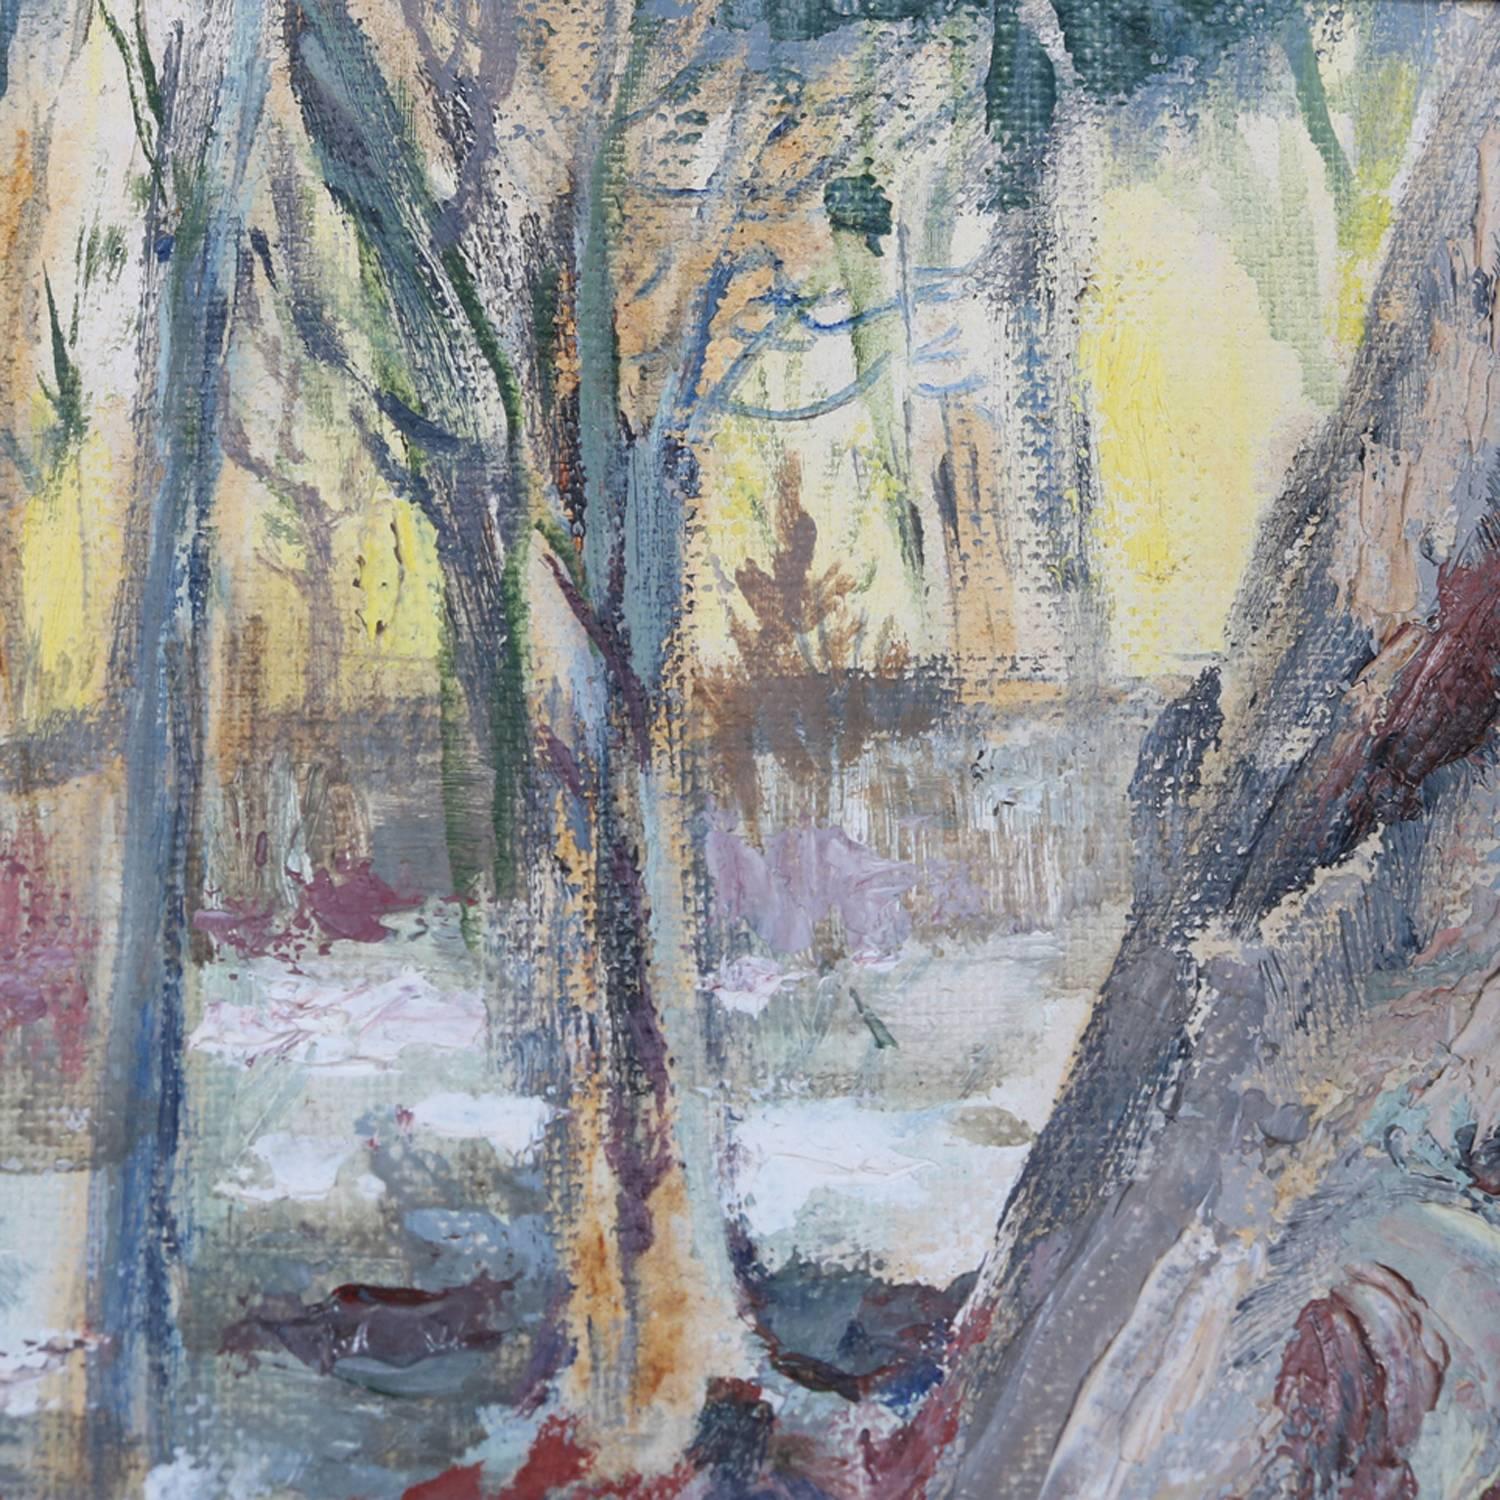 Hand-Painted Oil on Canvas Impressionist Landscape Painting of Winter Scene, 20th Century